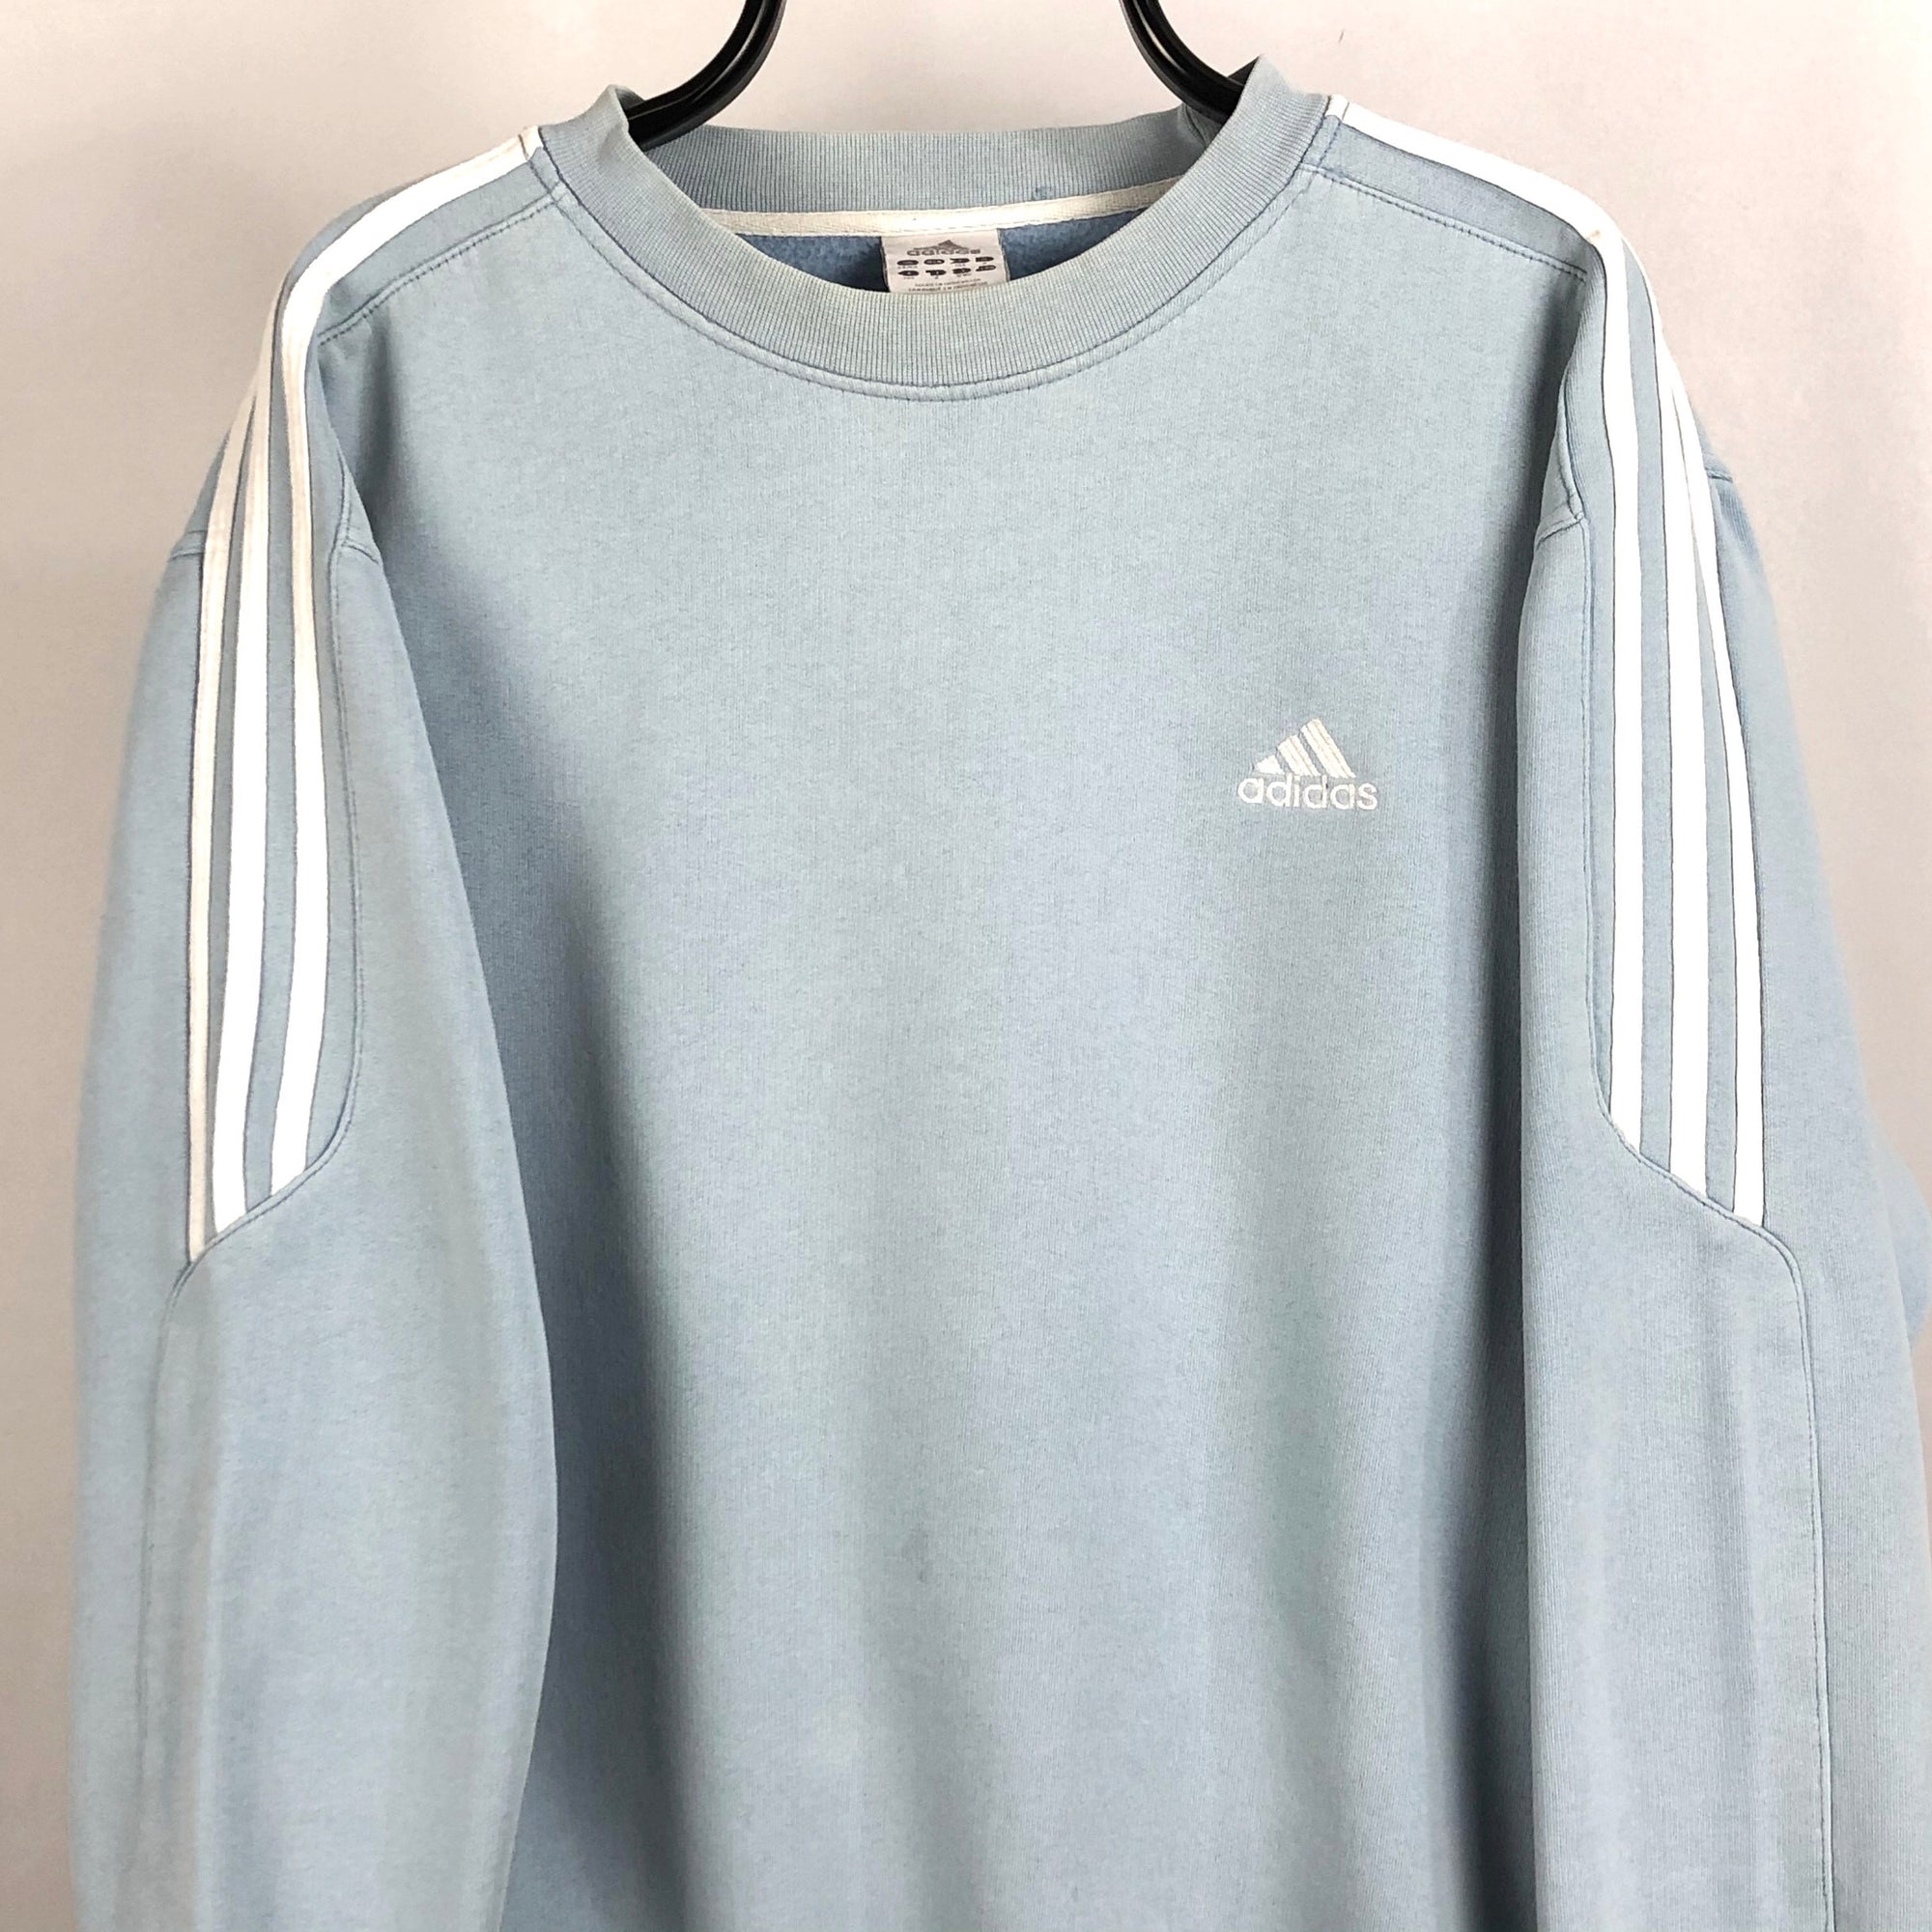 Vintage Adidas Embroidered Small Logo Sweatshirt in Baby Blue - Men’s Large/Women’s XL